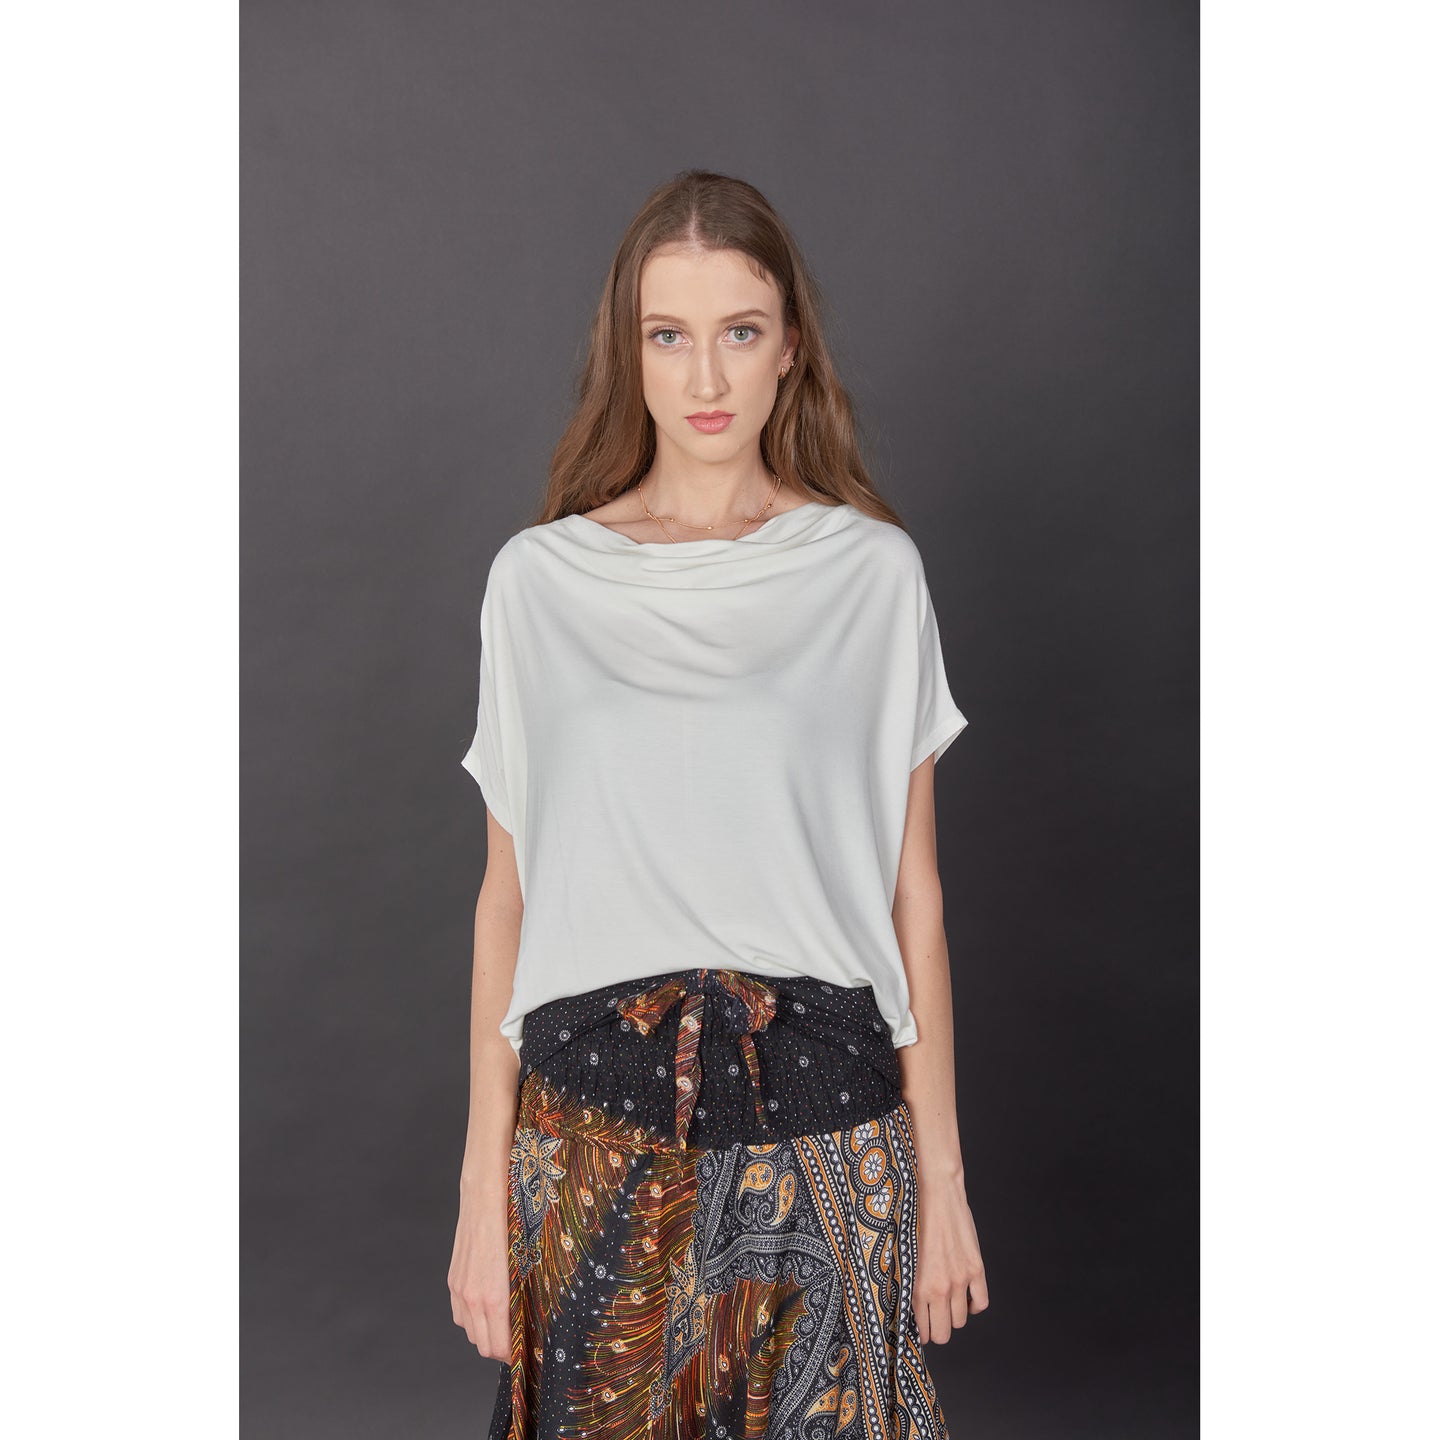 Solid Color Women's T-Shirt in White SH0183 070000 04